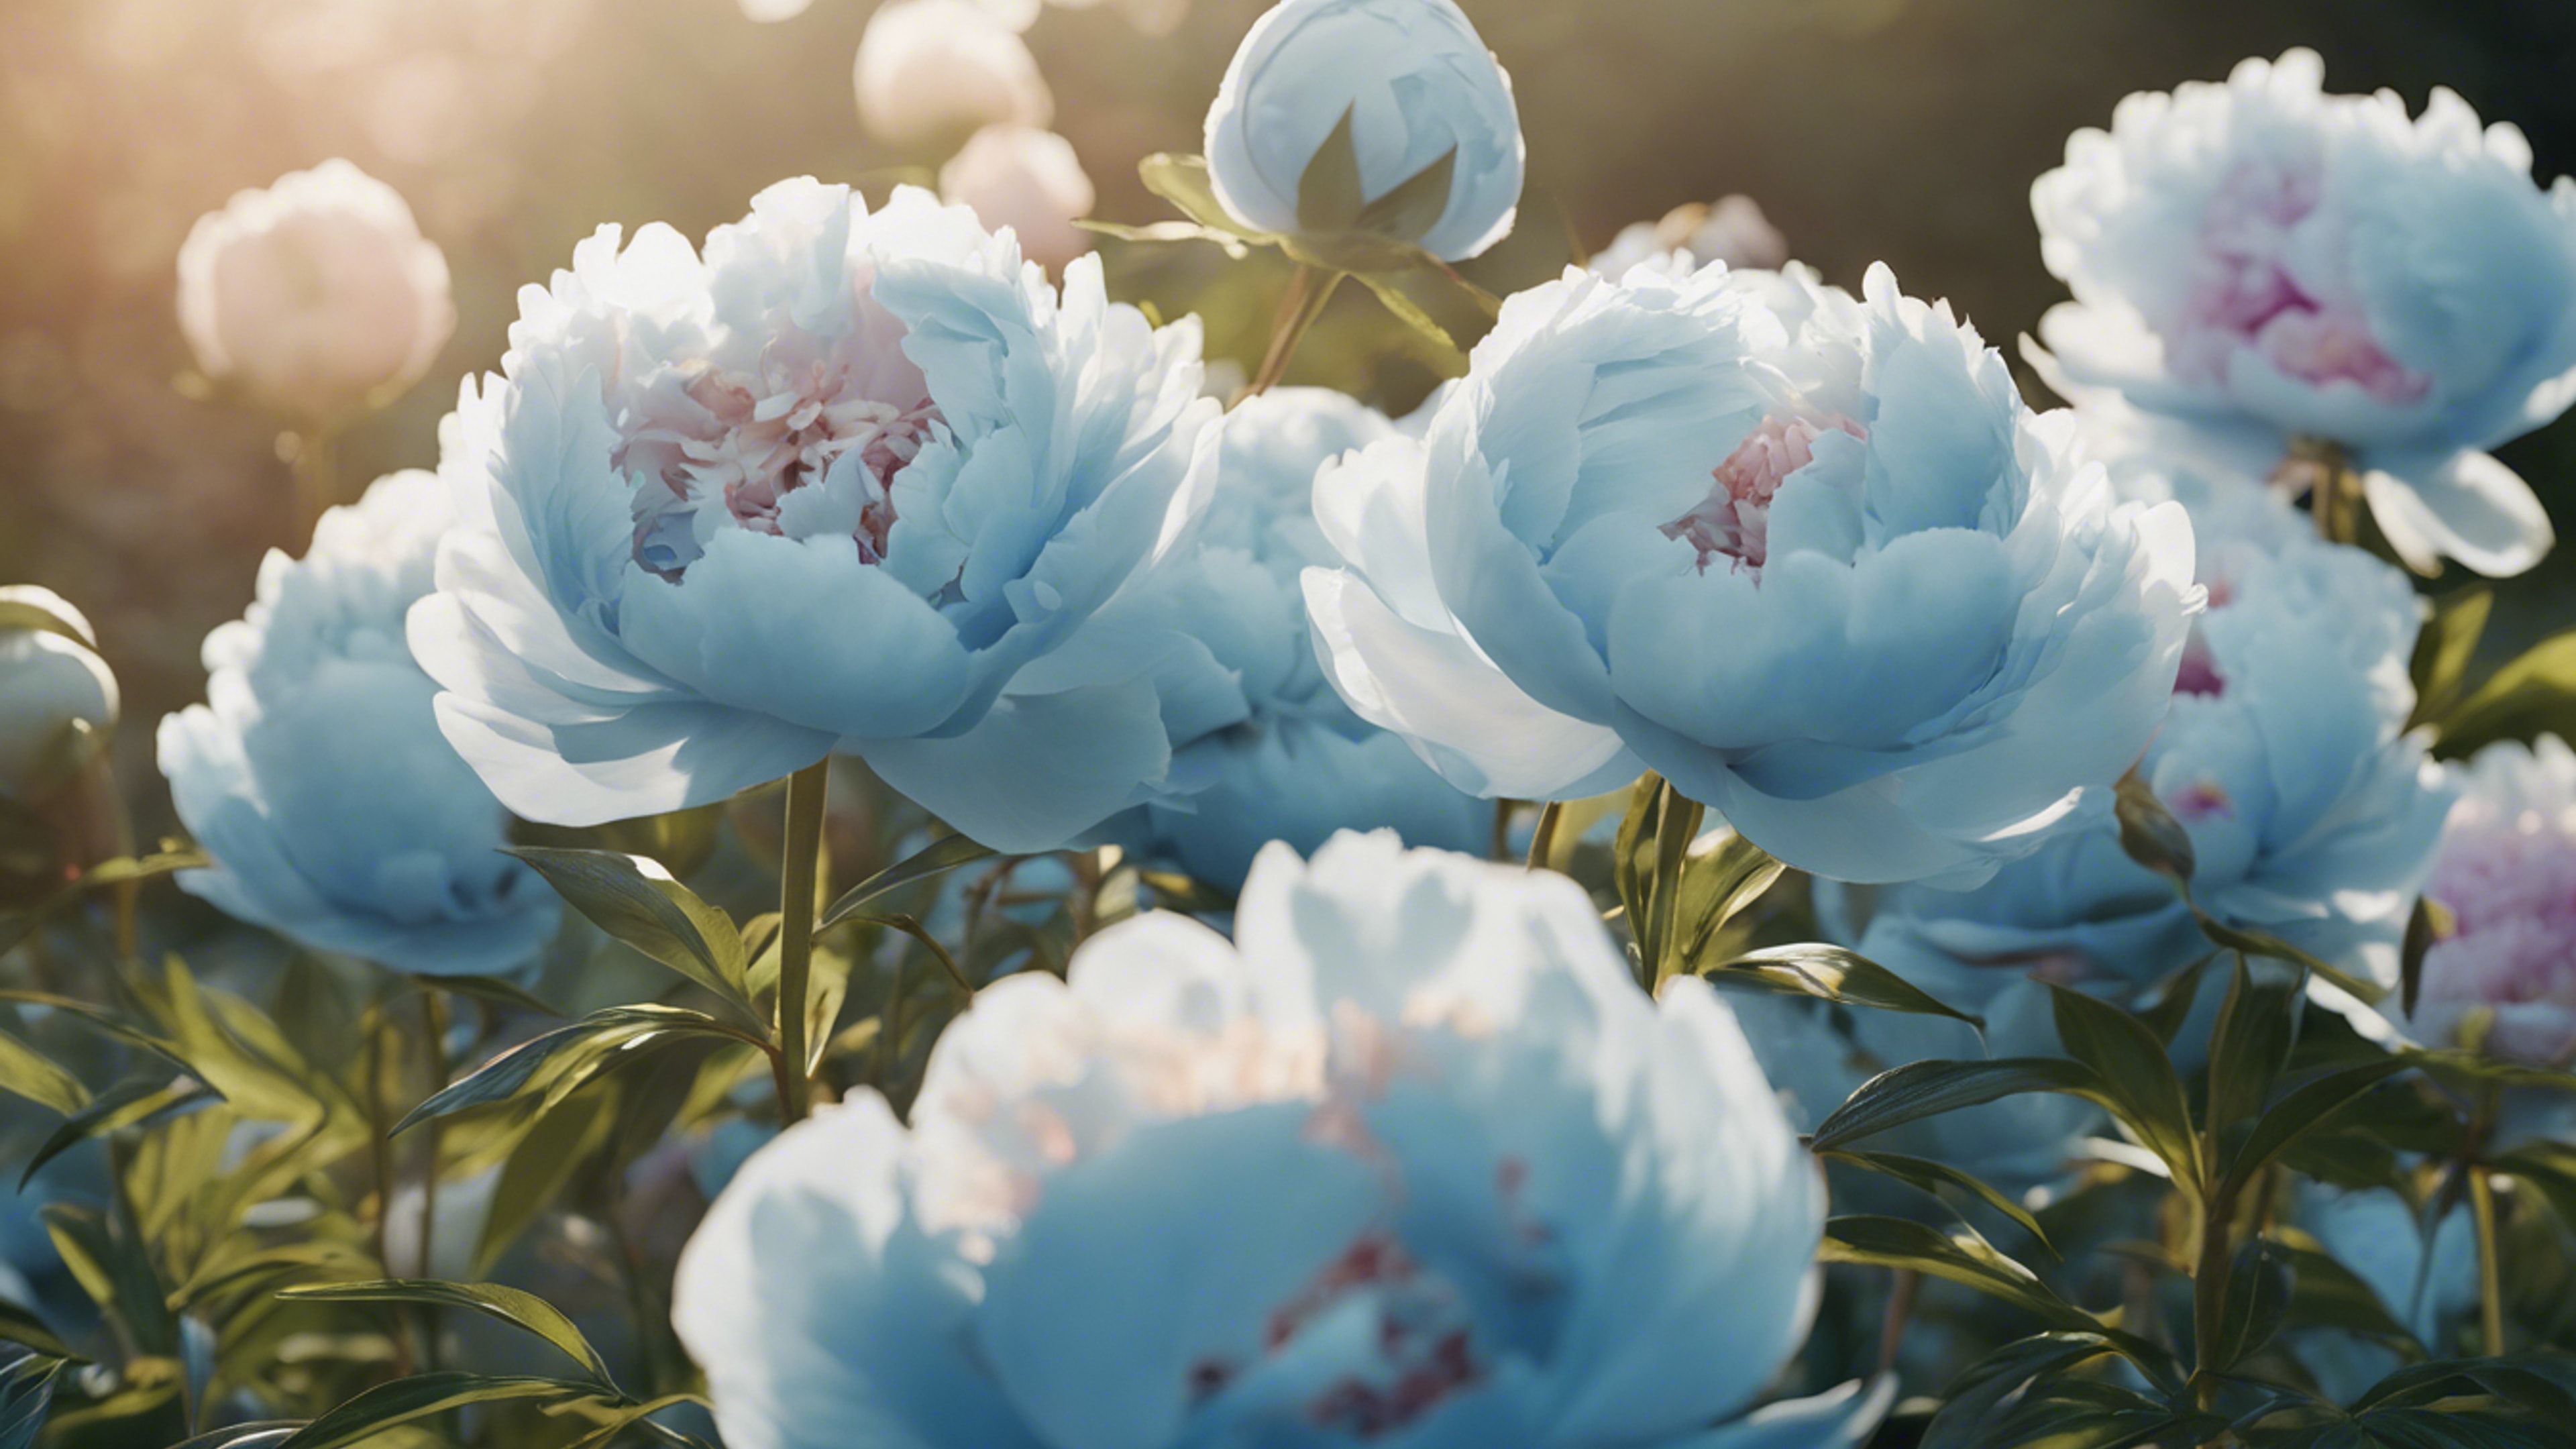 An array of pastel blue peonies blooming in a sunlit garden.壁紙[bebed2869b0c4244859a]